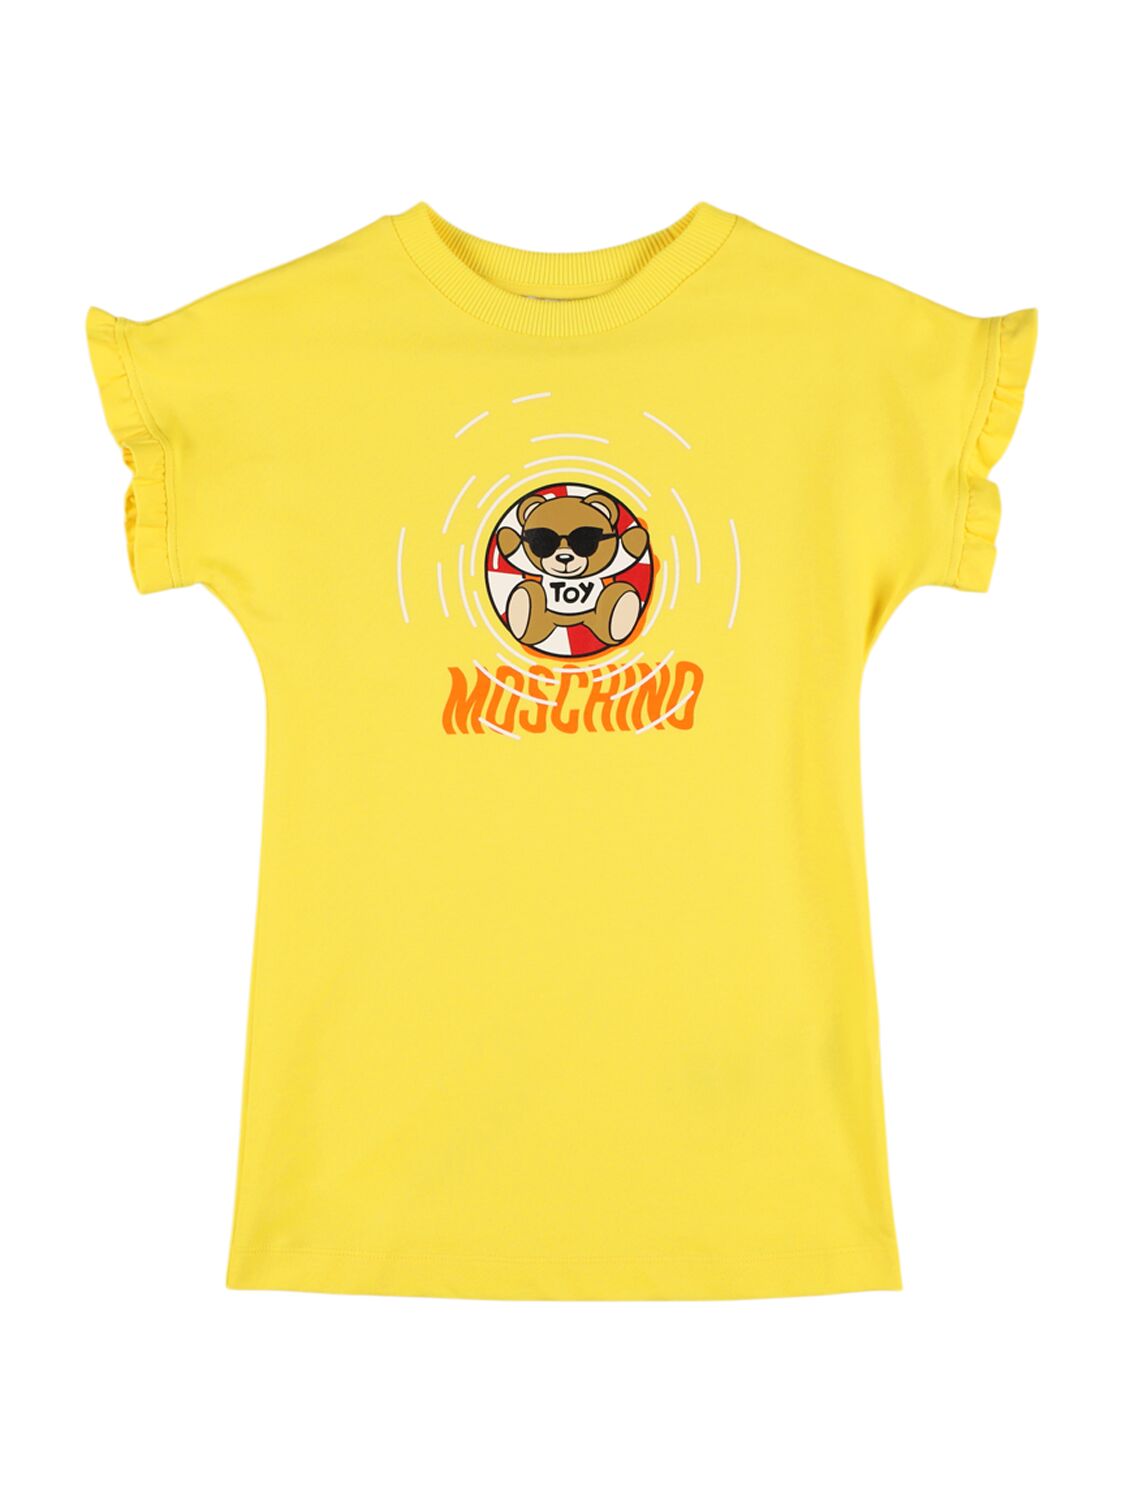 Moschino Kids' Printed Cotton Jersey Dress In Cyber Yellow